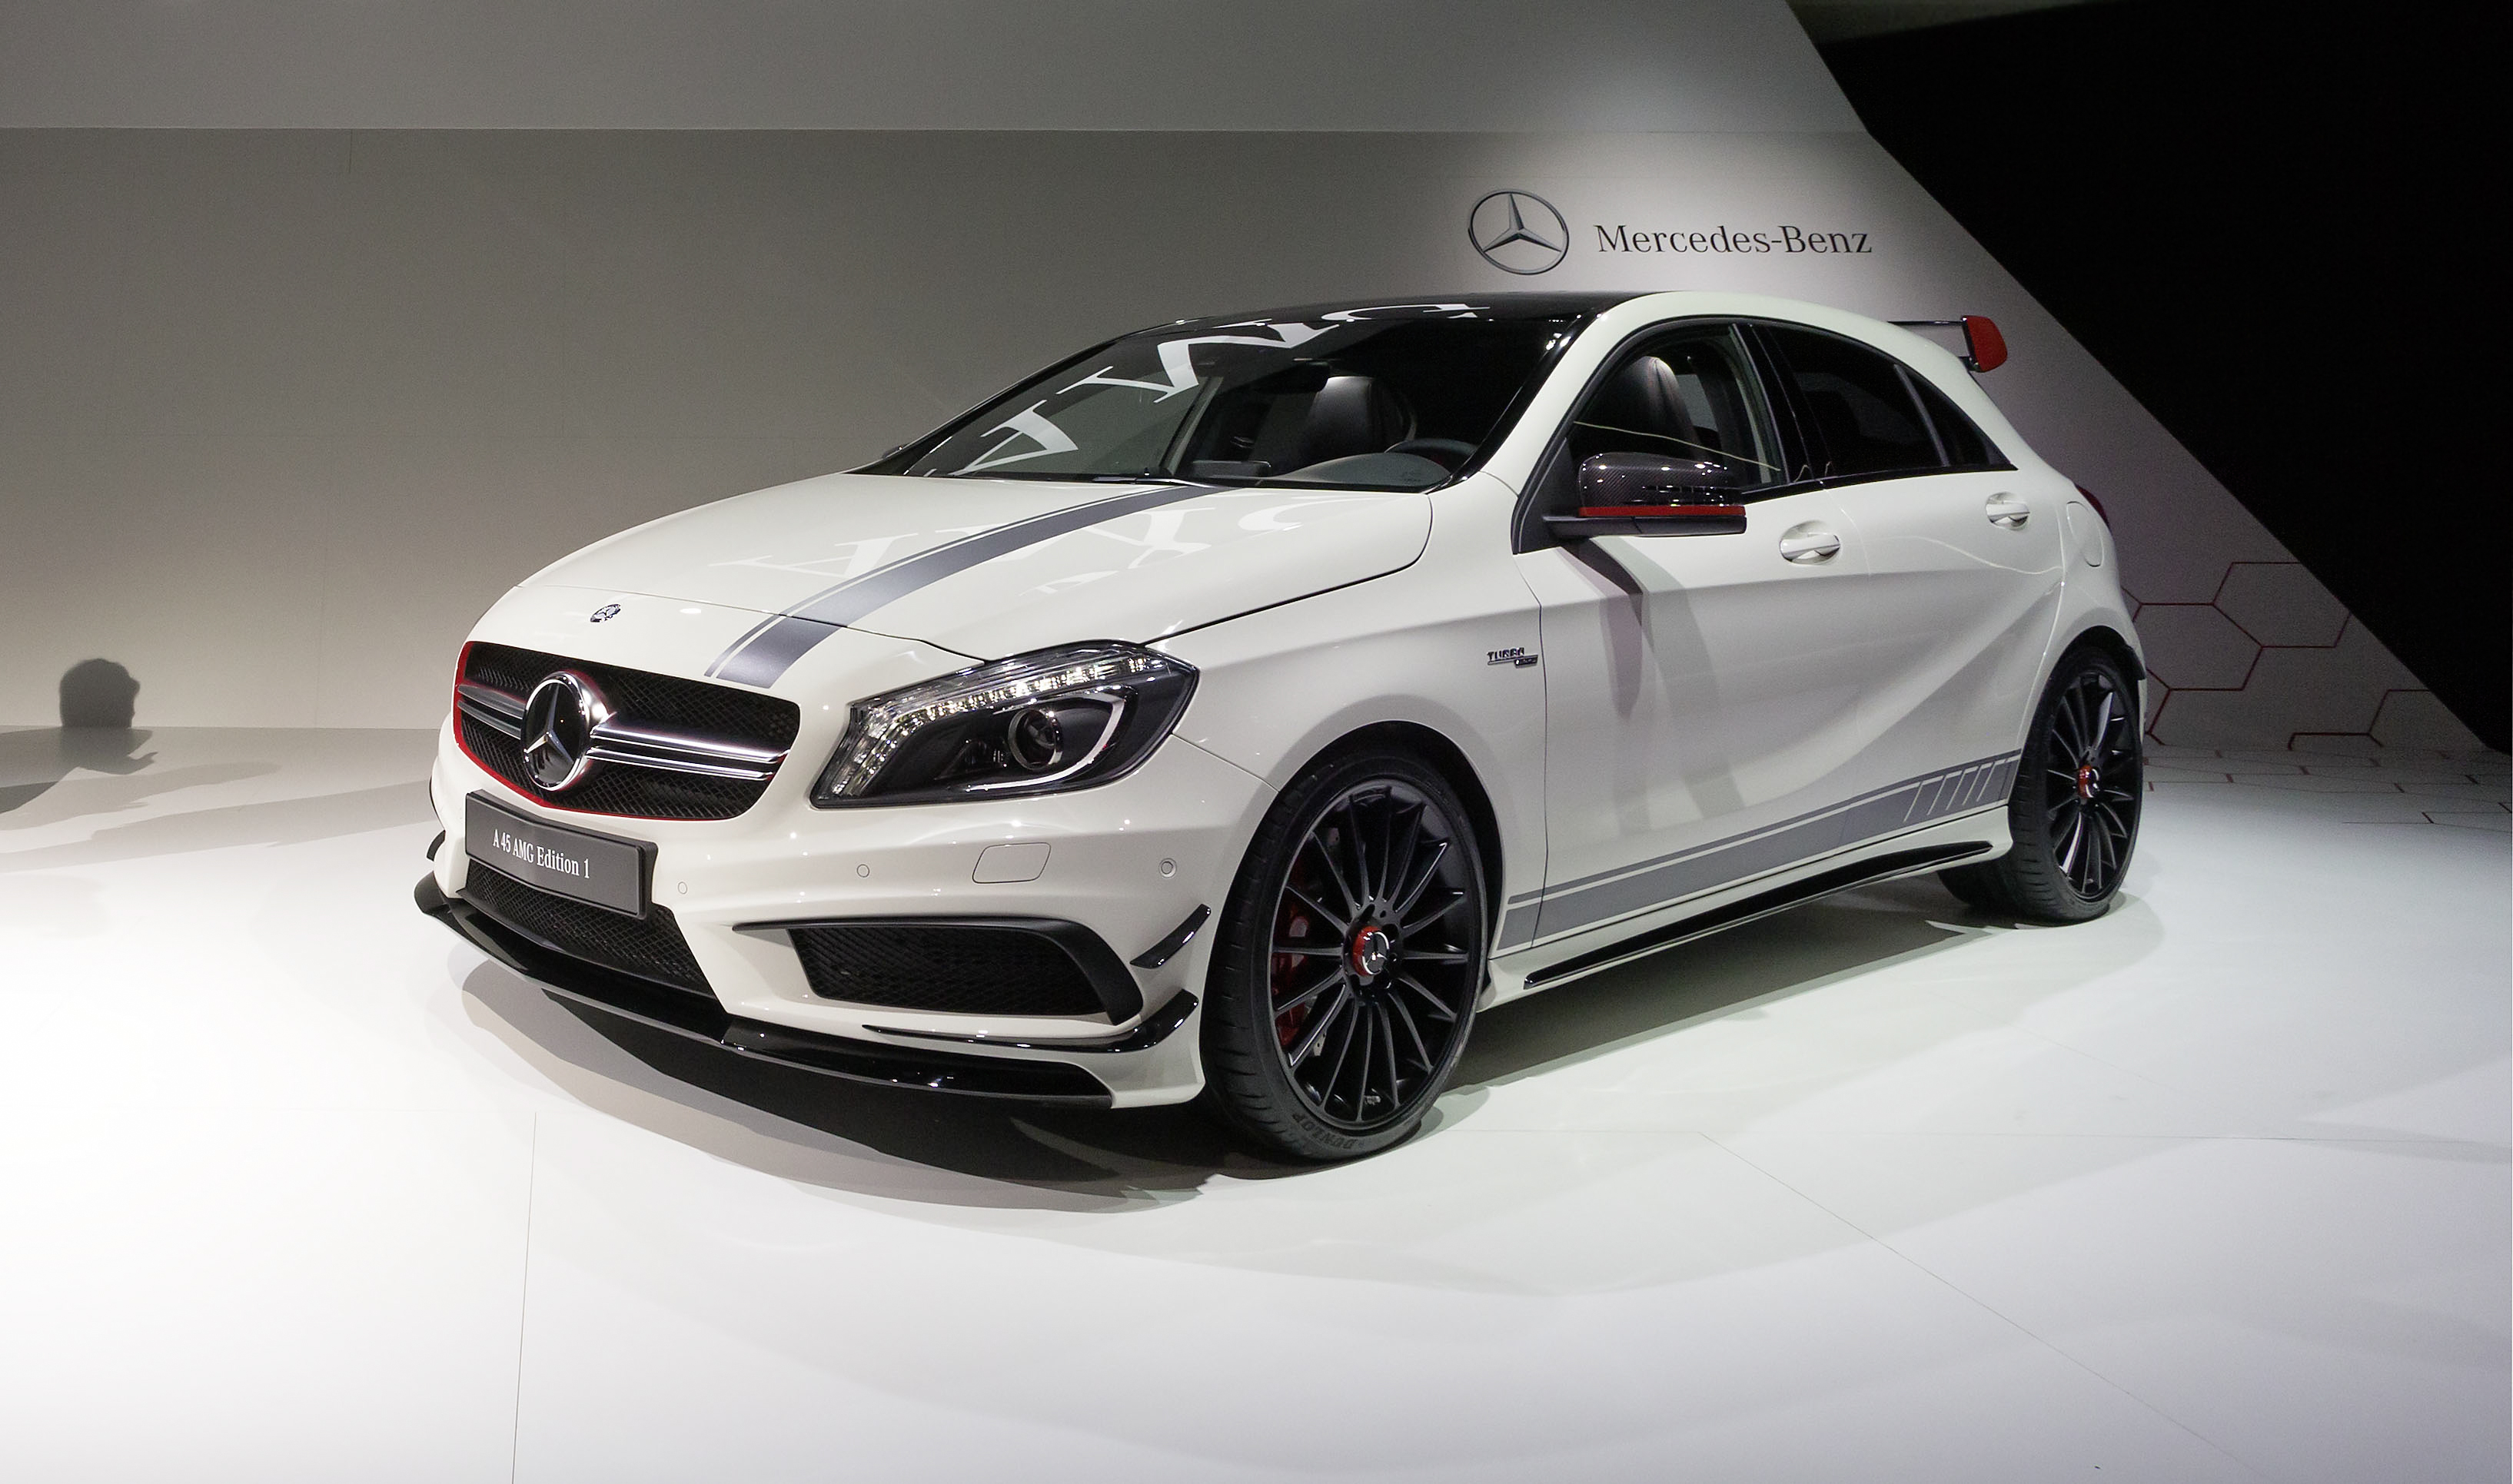 HQ Mercedes-Benz AMG A45 Wallpapers | File 1822.58Kb